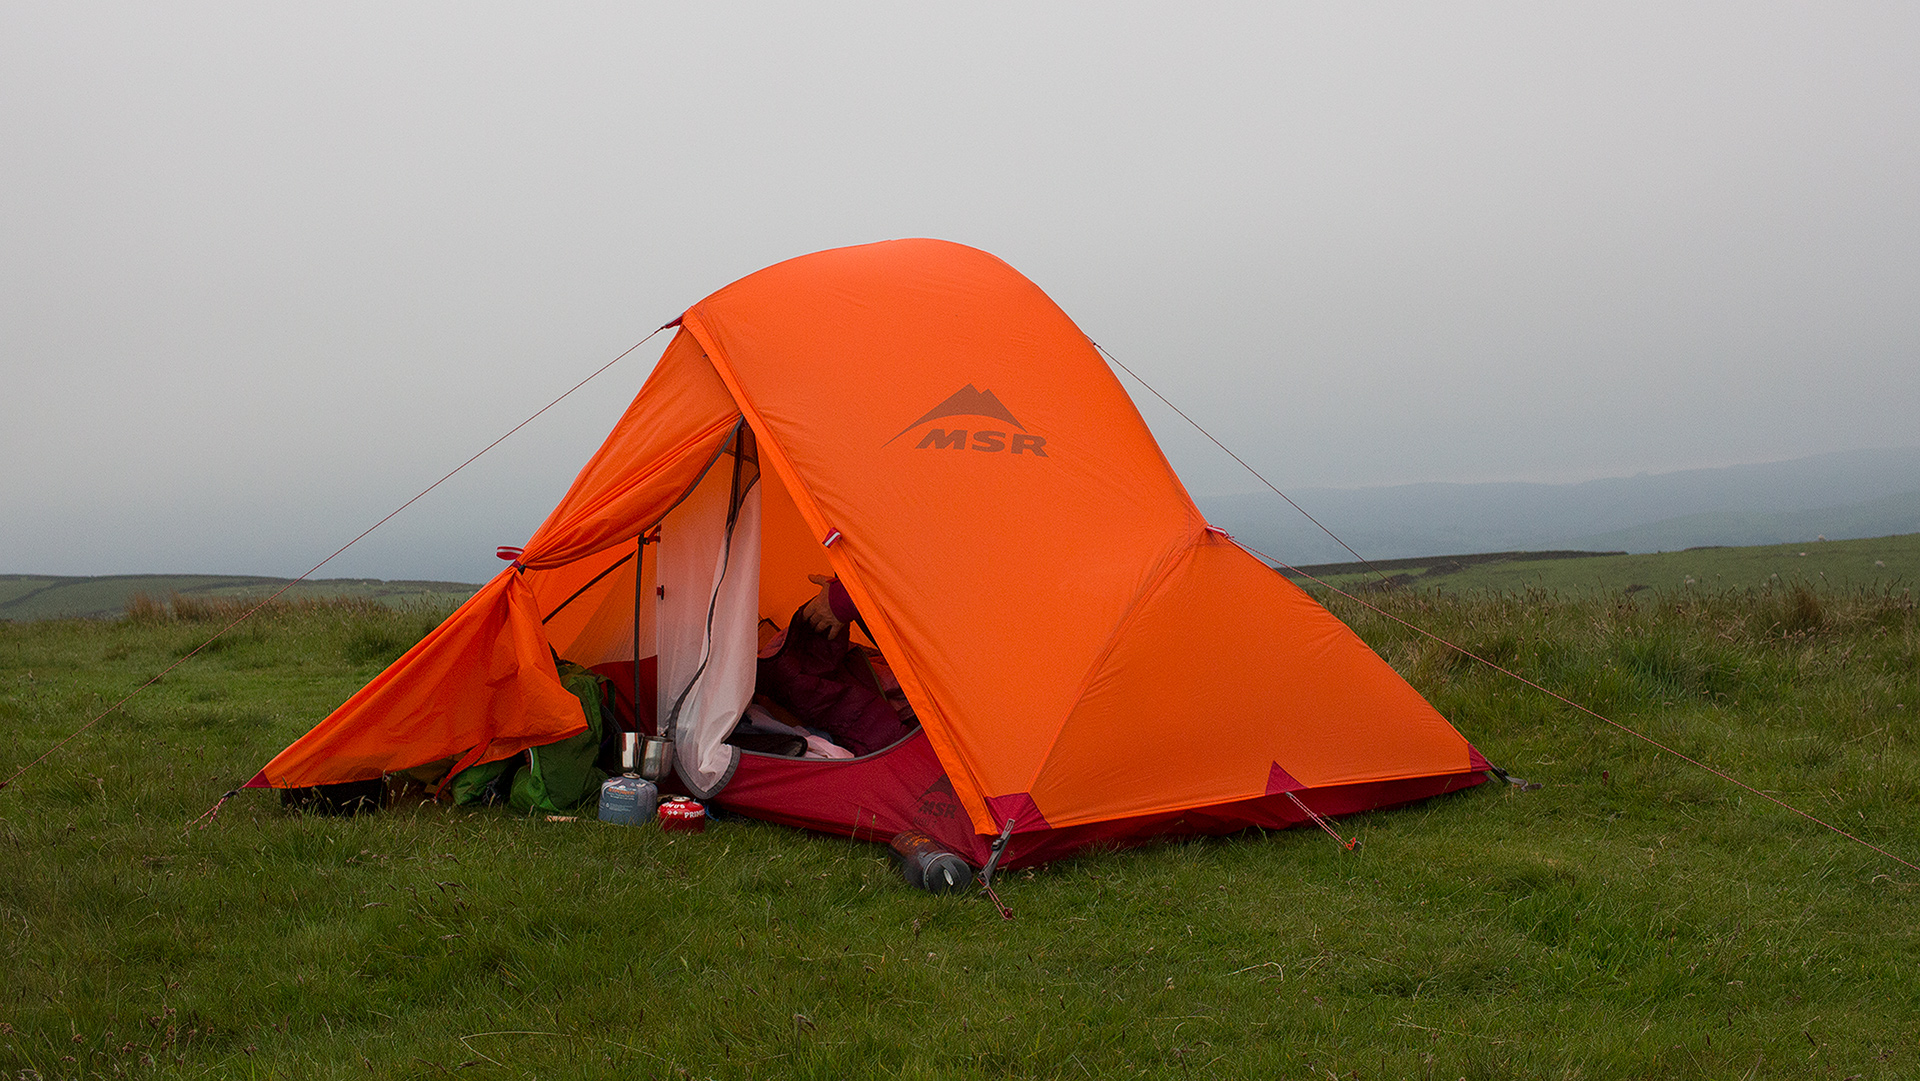 MSR Access 2 tent in the Peak District